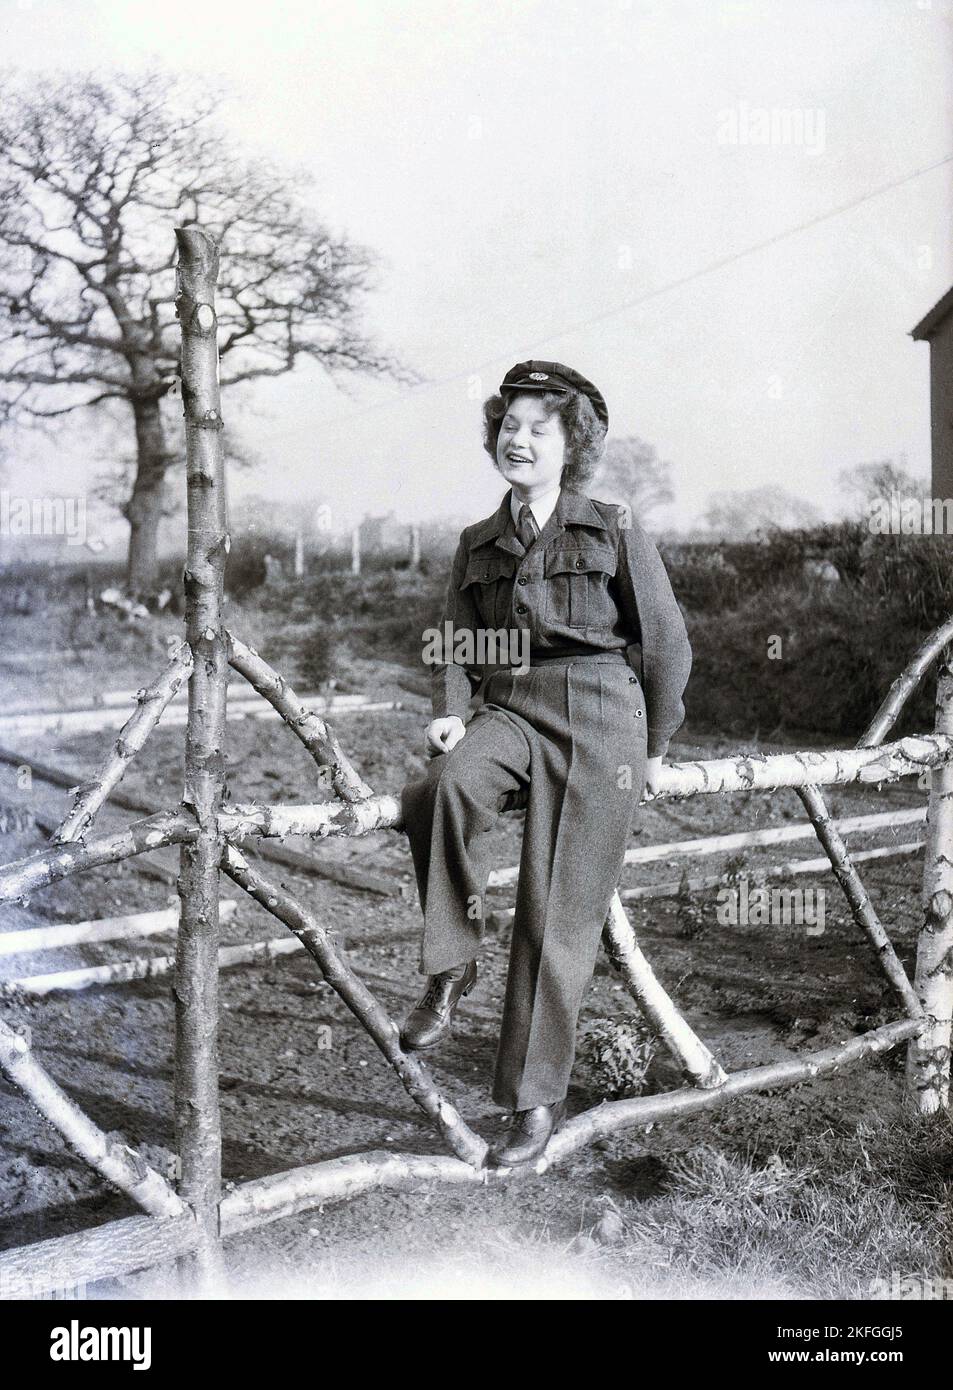 1940s, historical, posing for a photo on a fence outside Longford Camp, at RAF Ternhill near Market Drayton, Shropshire, England, UK, a young female WAAF in a collar and tie, woollen cloth tunic and trousers and hat. The Women's Auxillary Air Force (WAAF) was formed in June 1939, with intital recruits being between 18-43 years old. Stock Photo